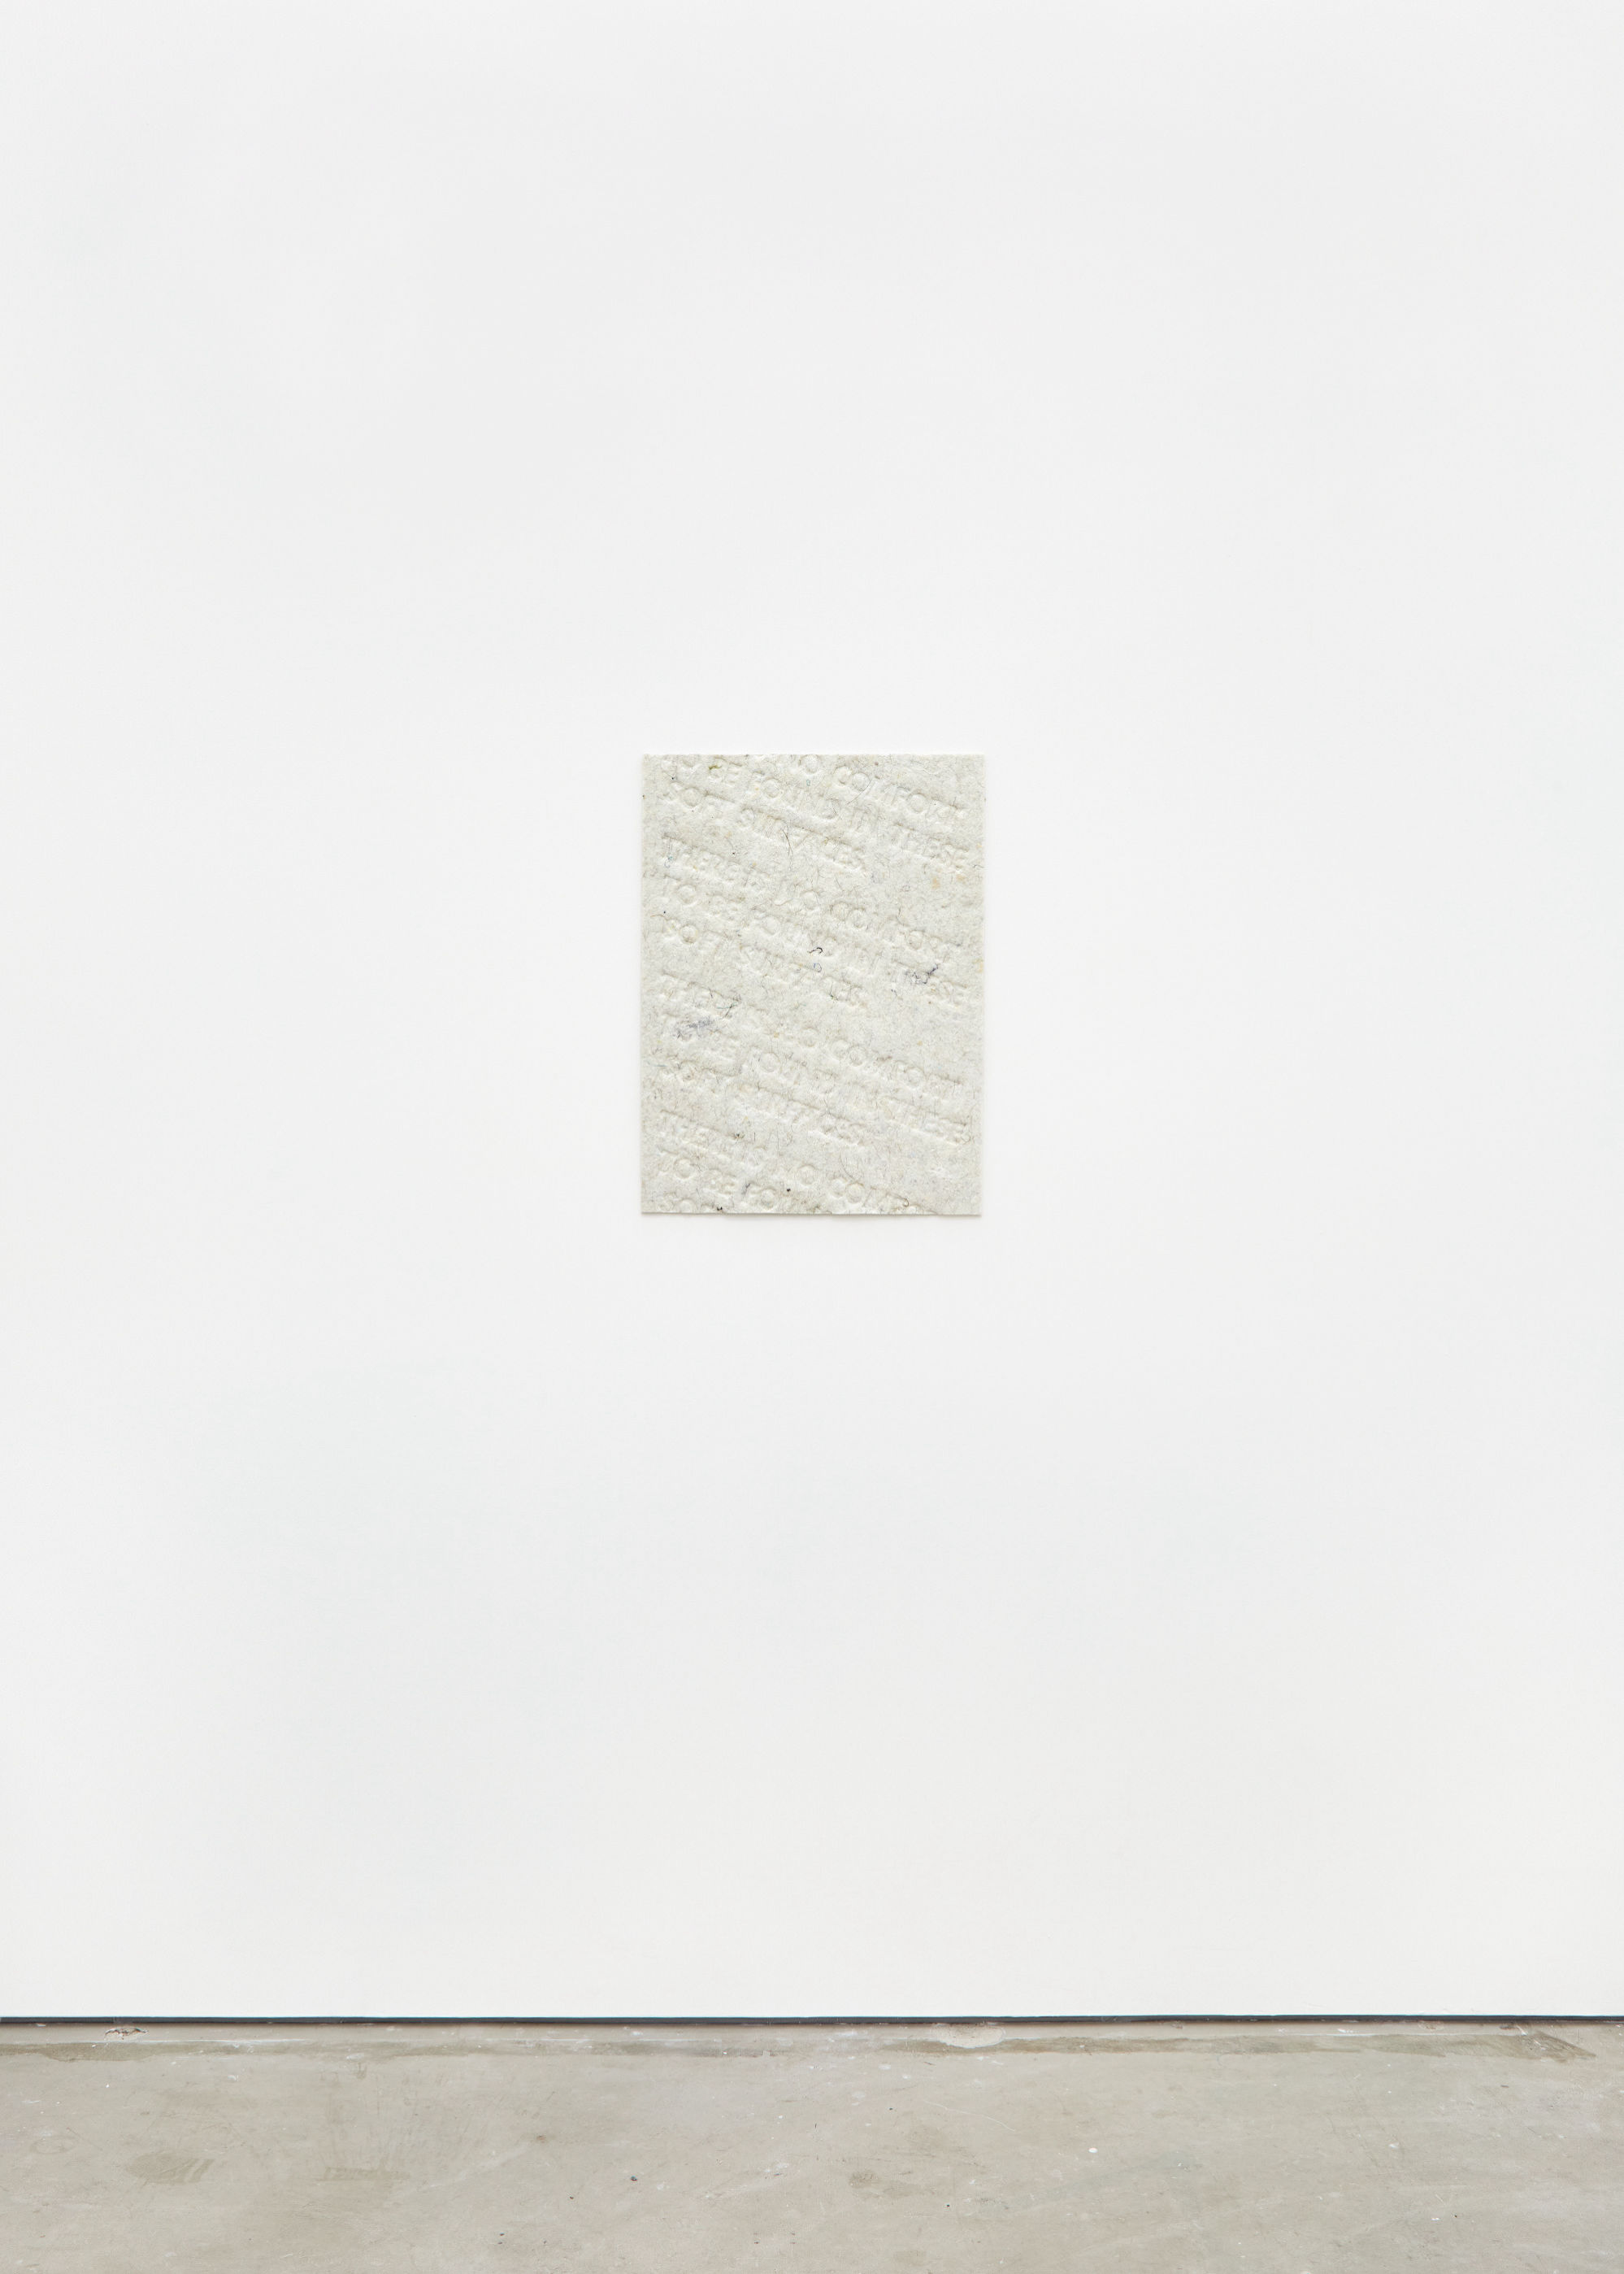 James Fuller - There Is No Comfort To Be Found In These Soft Surfaces 2021 -  THERE IS NO COMFORT TO BE FOUND IN THESE SOFT SURFACES (2021) - Pressed mixed fibre spring mattress wadding, steel - 03